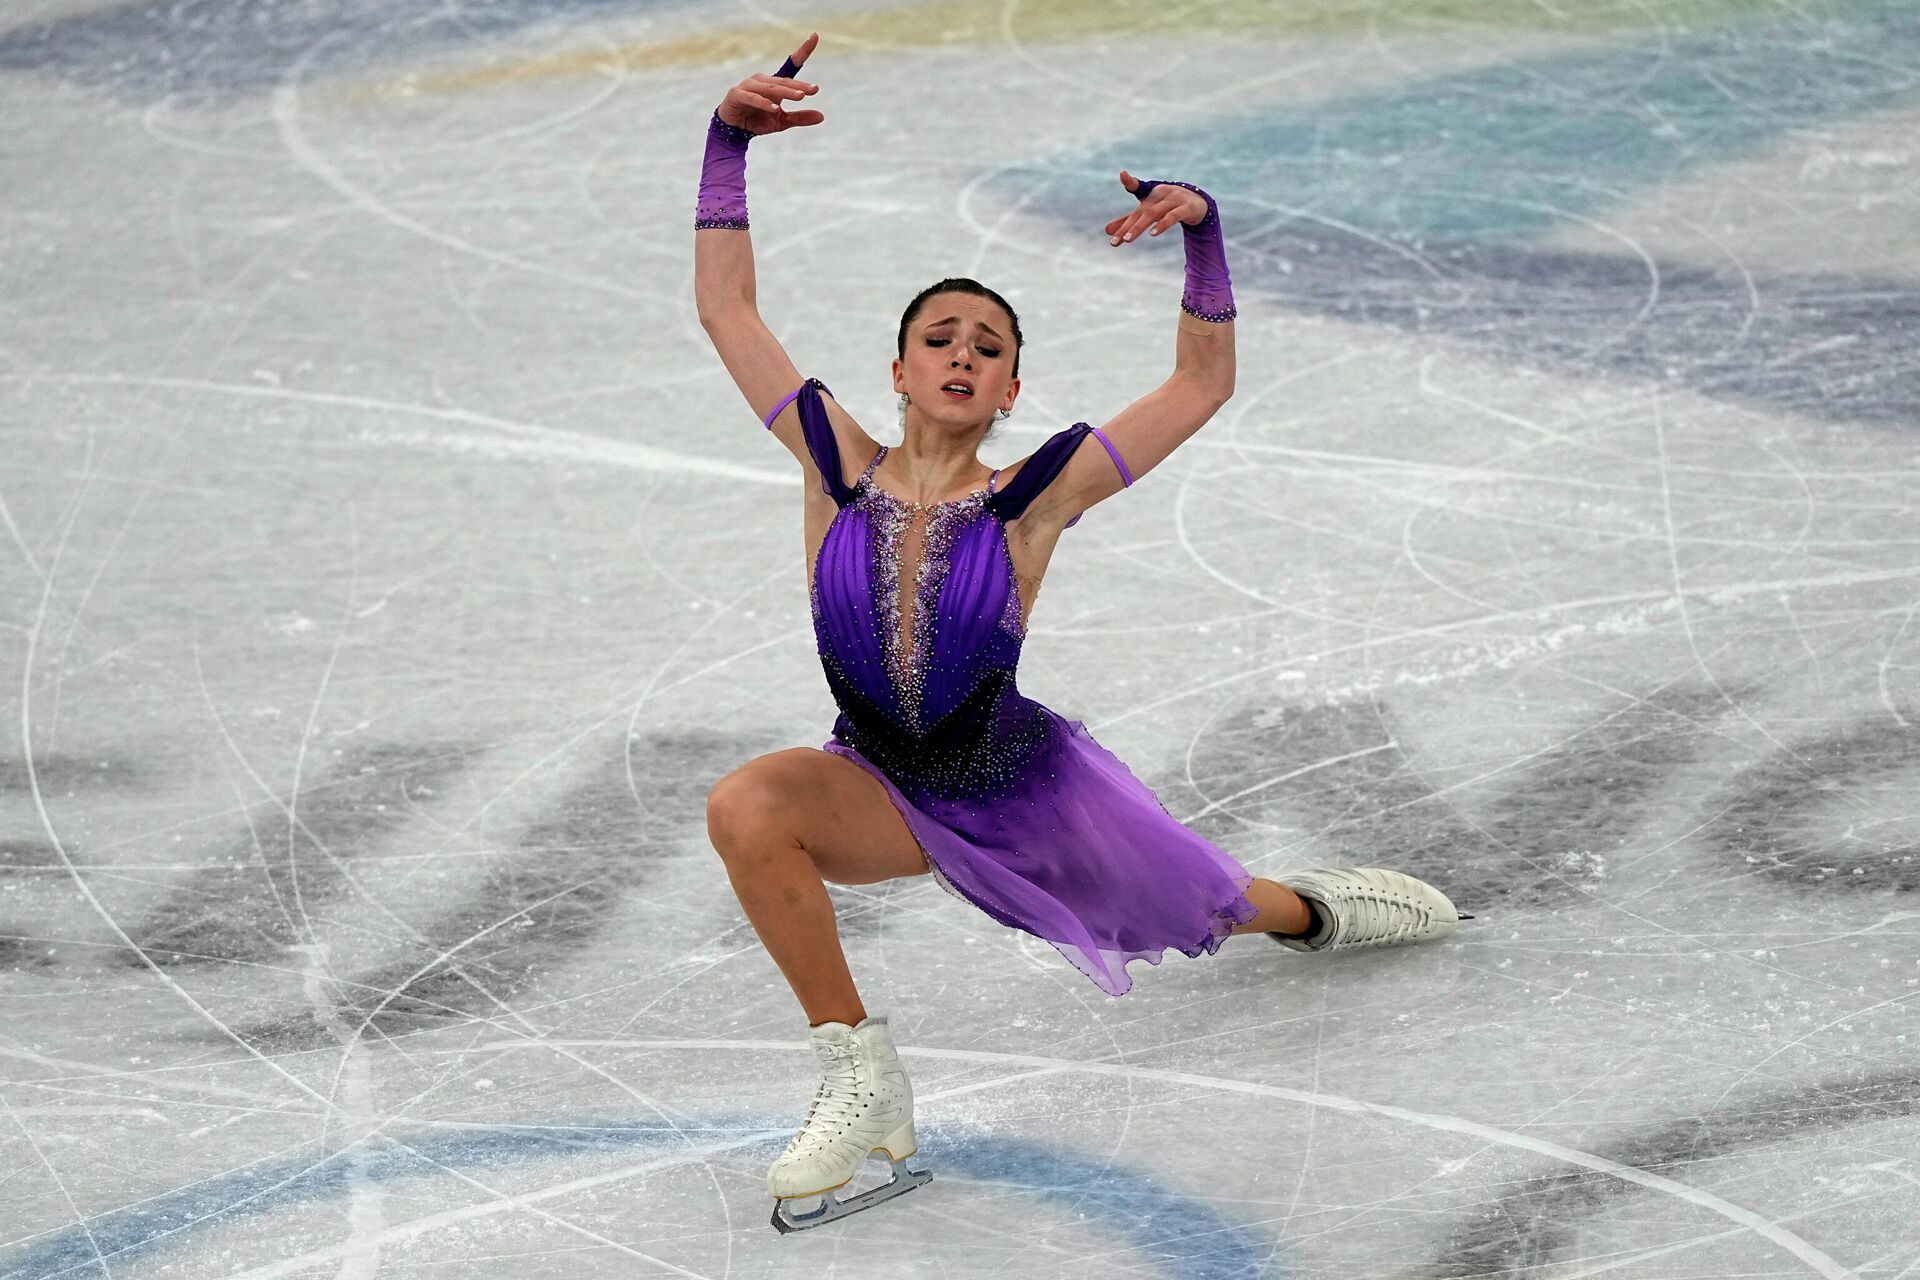 Kamila Valieva, of the Russian Olympic Committee, competes in the women's short program team figure skating competition at the 2022 Winter Olympics, Sunday, Feb. 6, 2022, in Beijing. - Sputnik International, 1920, 14.02.2022